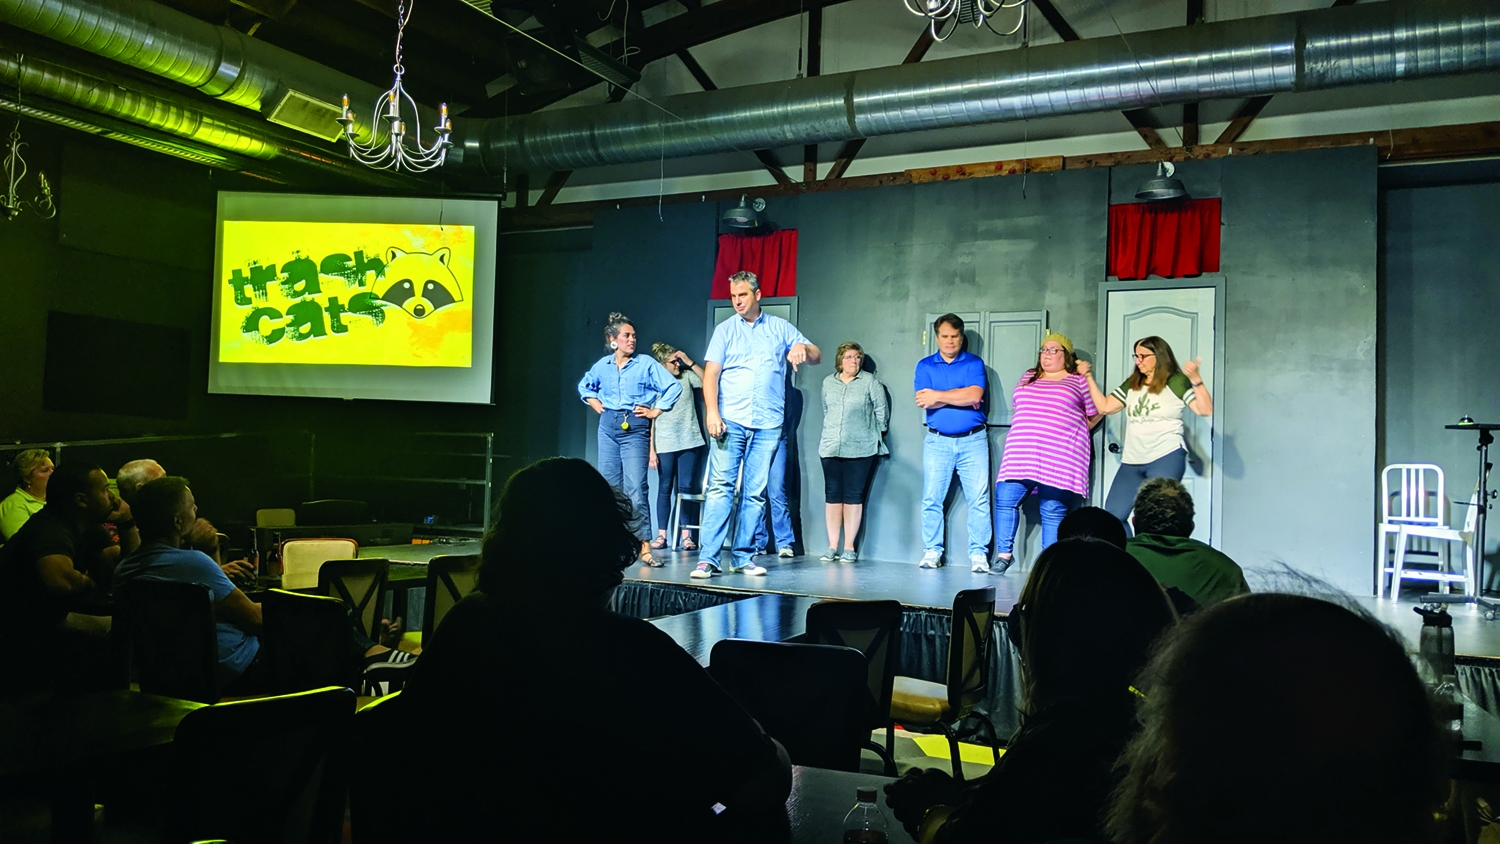 School of Laughs: A local training center is preparing the next  comedians, actors and regular Joes